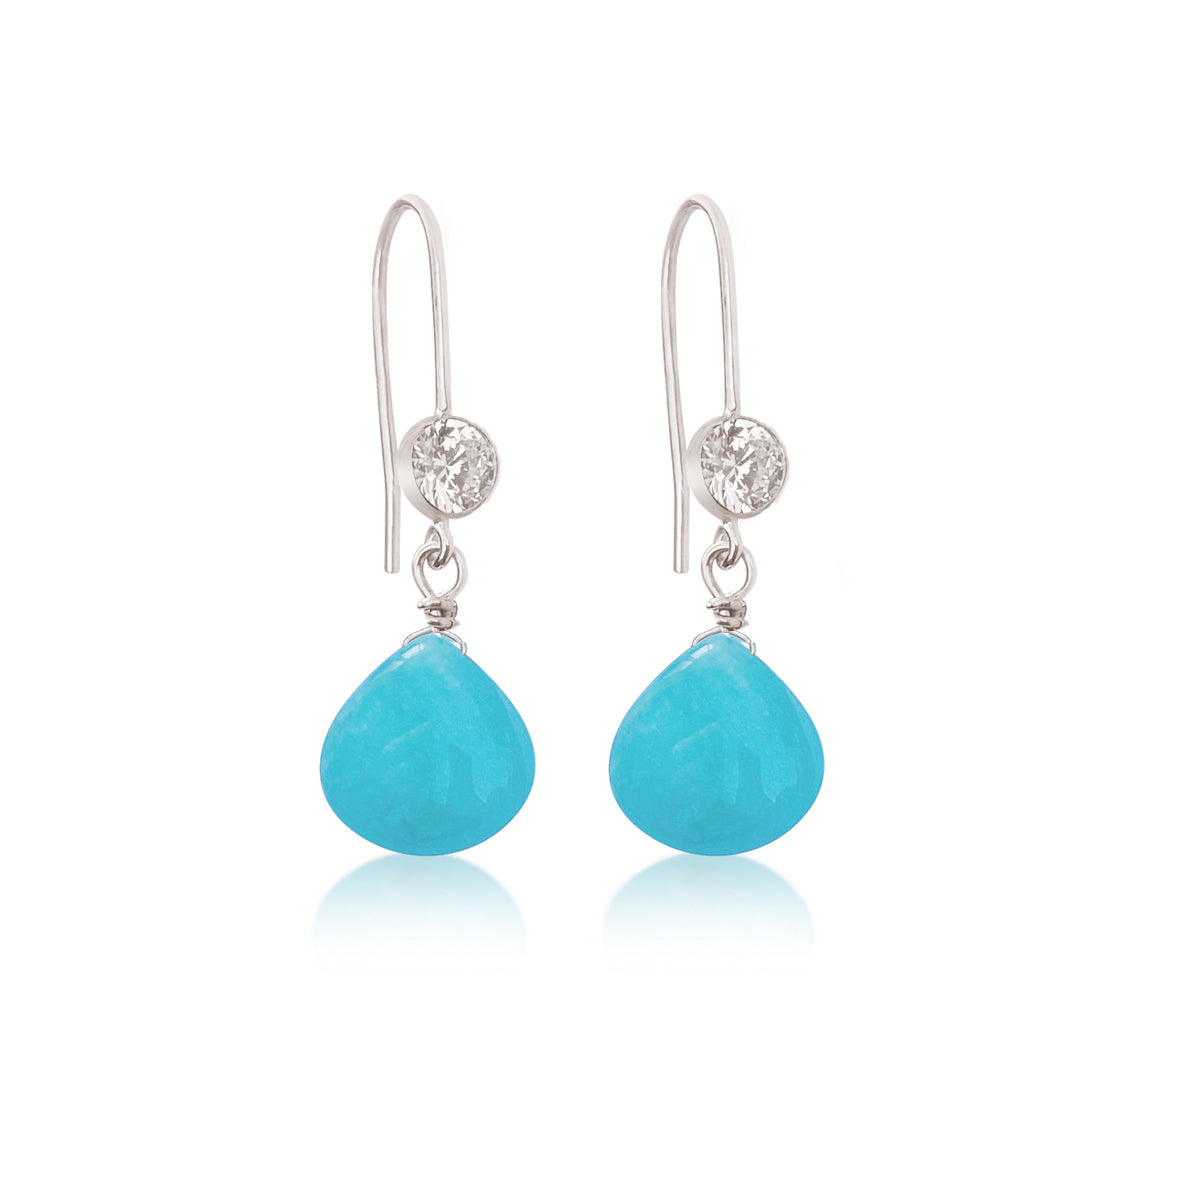 Amazonite Earrings for Courage and to Create a Feeling of Power Within You